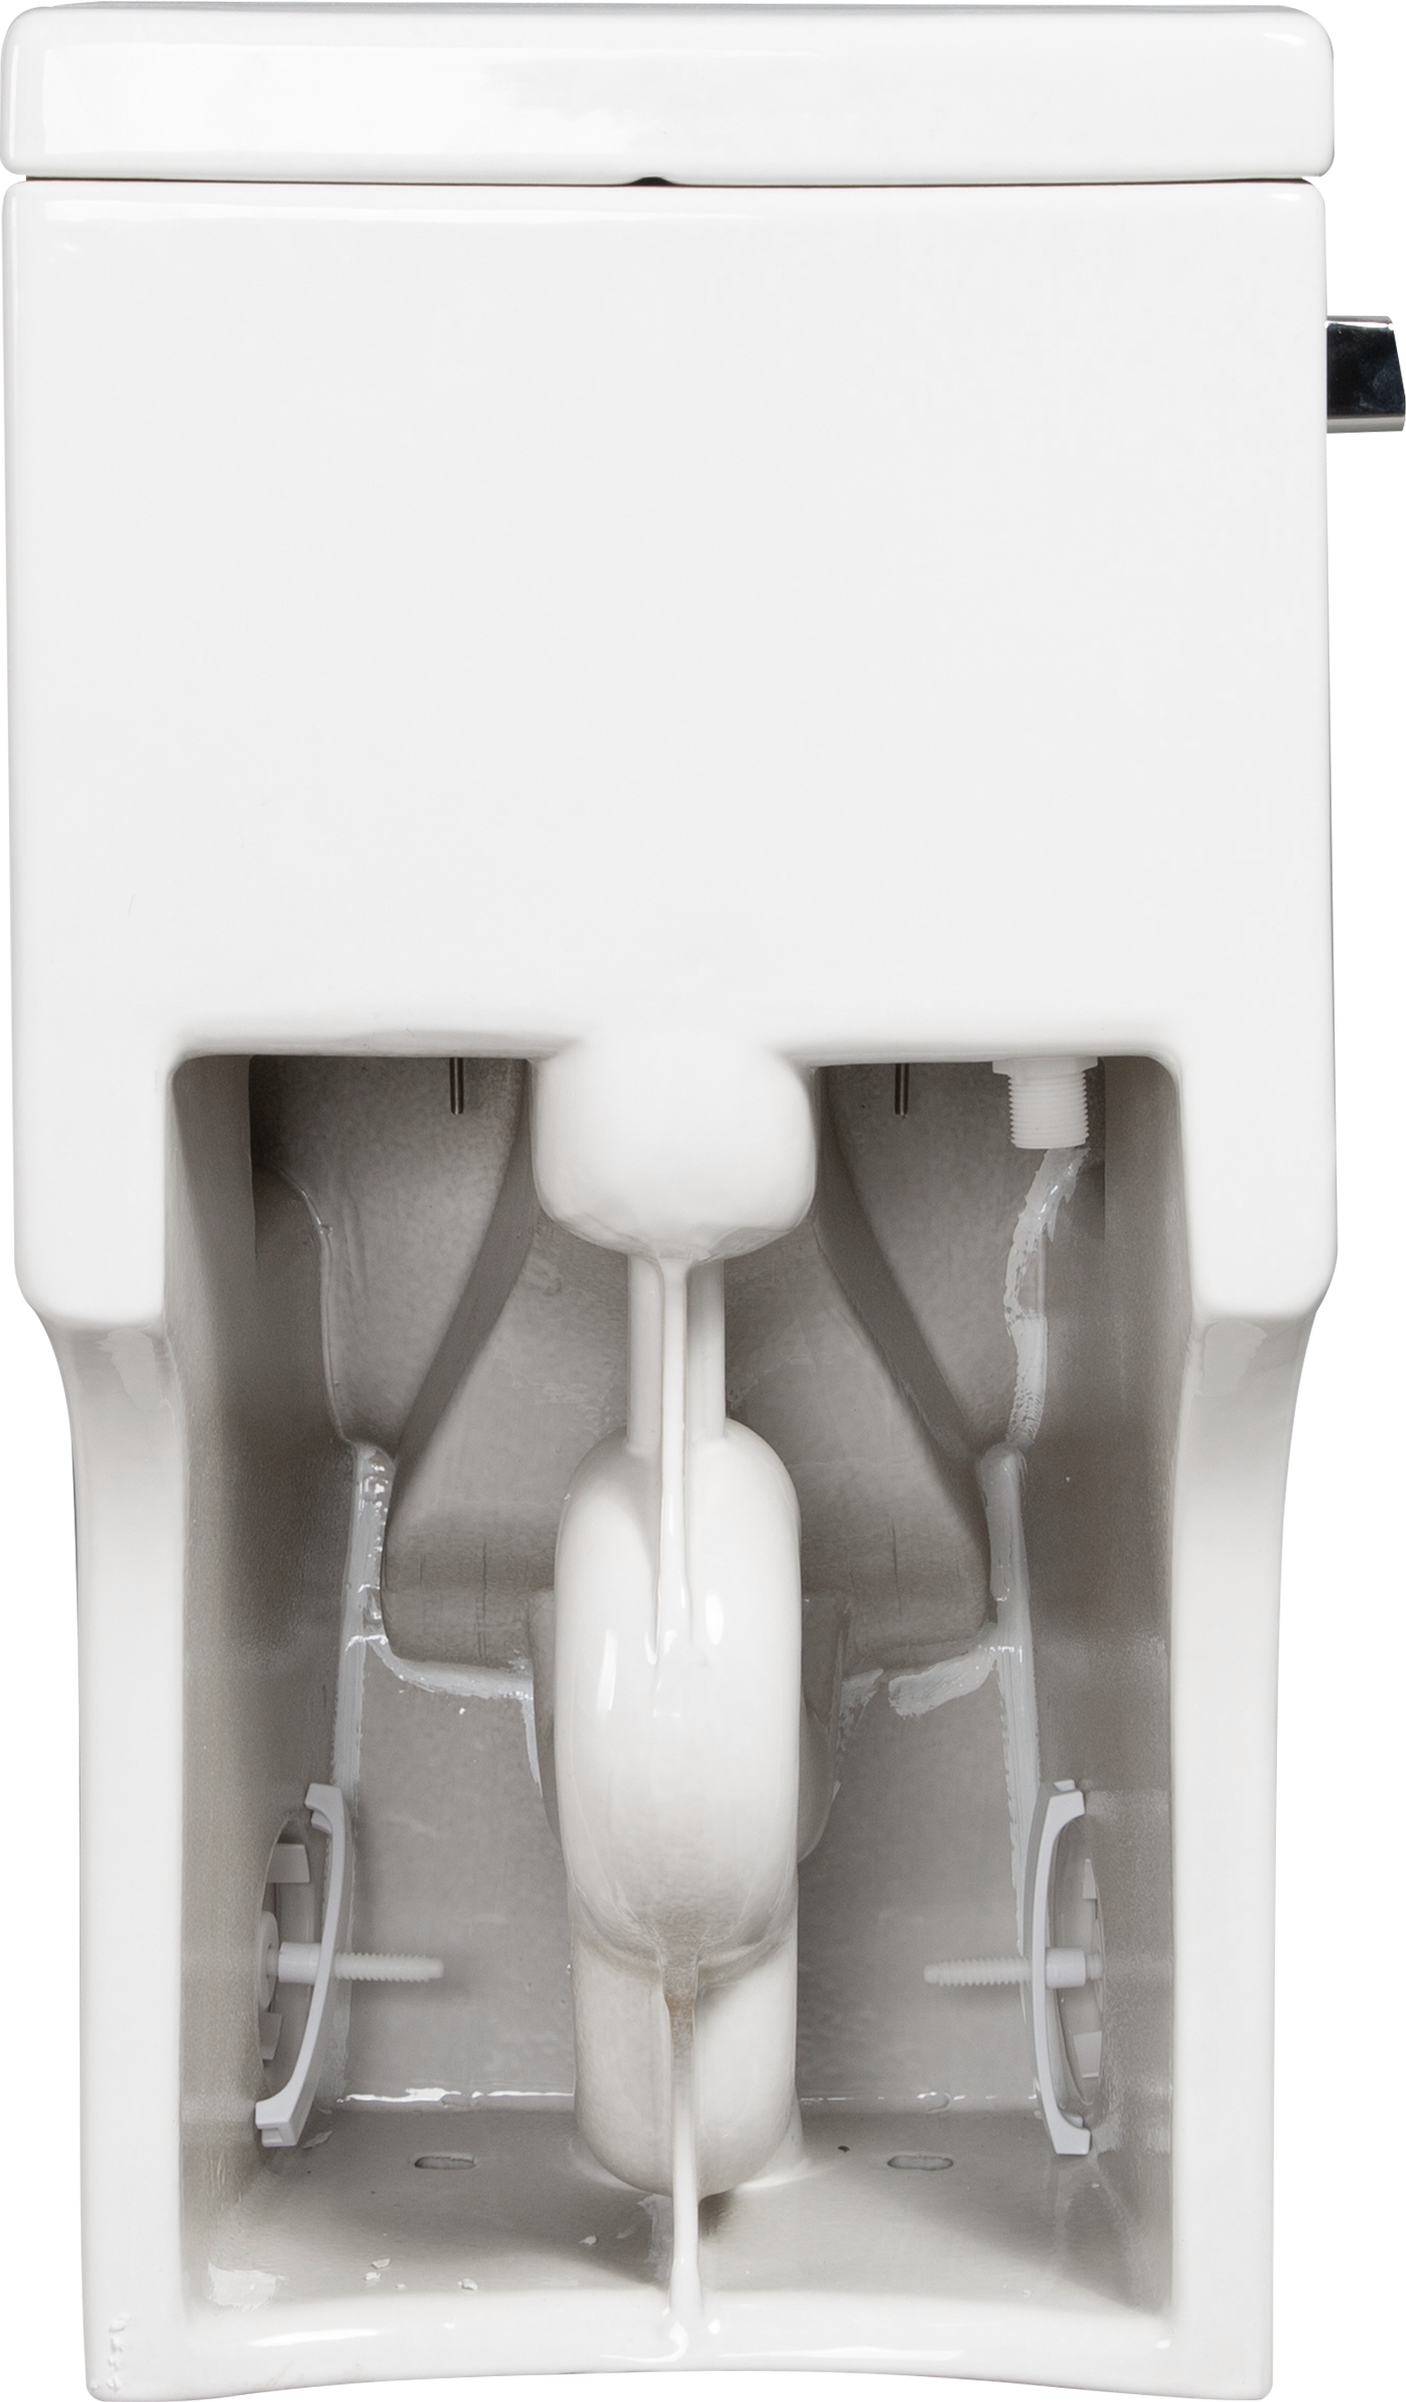 15 1/8 Inch 1.28 GPF 1-Piece Elongated Toilet with Soft-Close Seat - Gloss White  23T03-GW